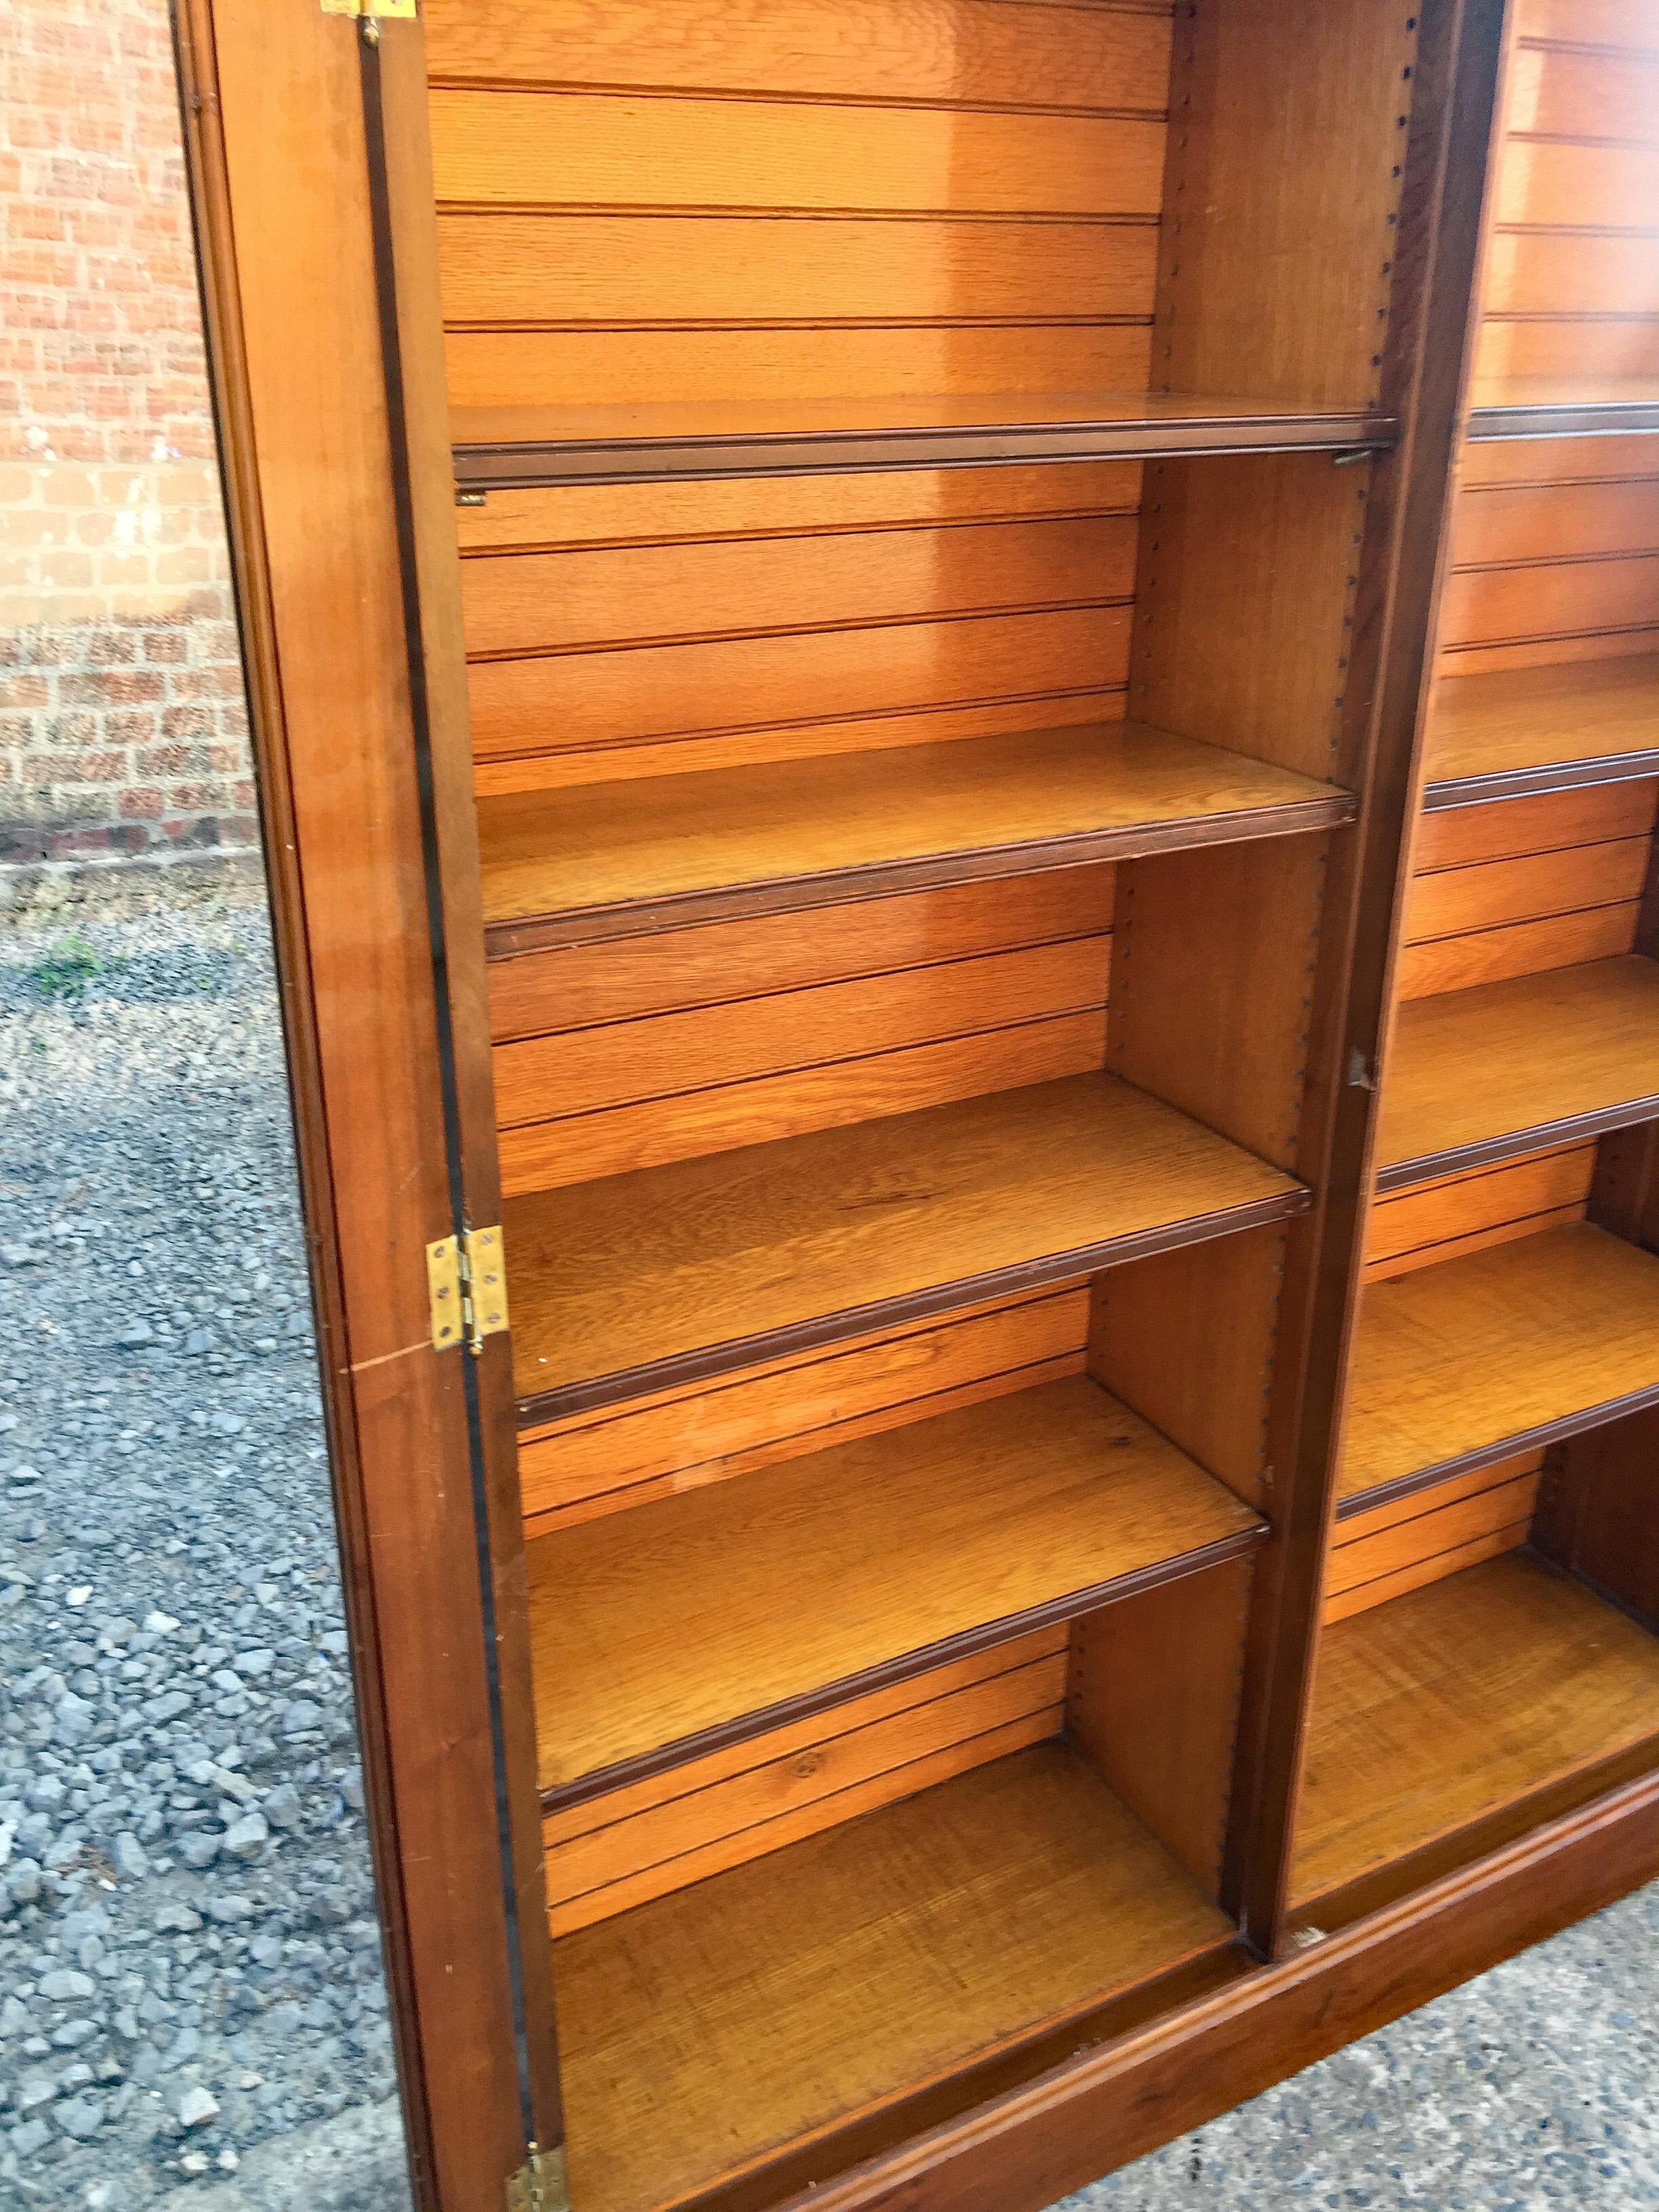 Storage Unit or Library in American Walnut, circa 1900 For Sale 8